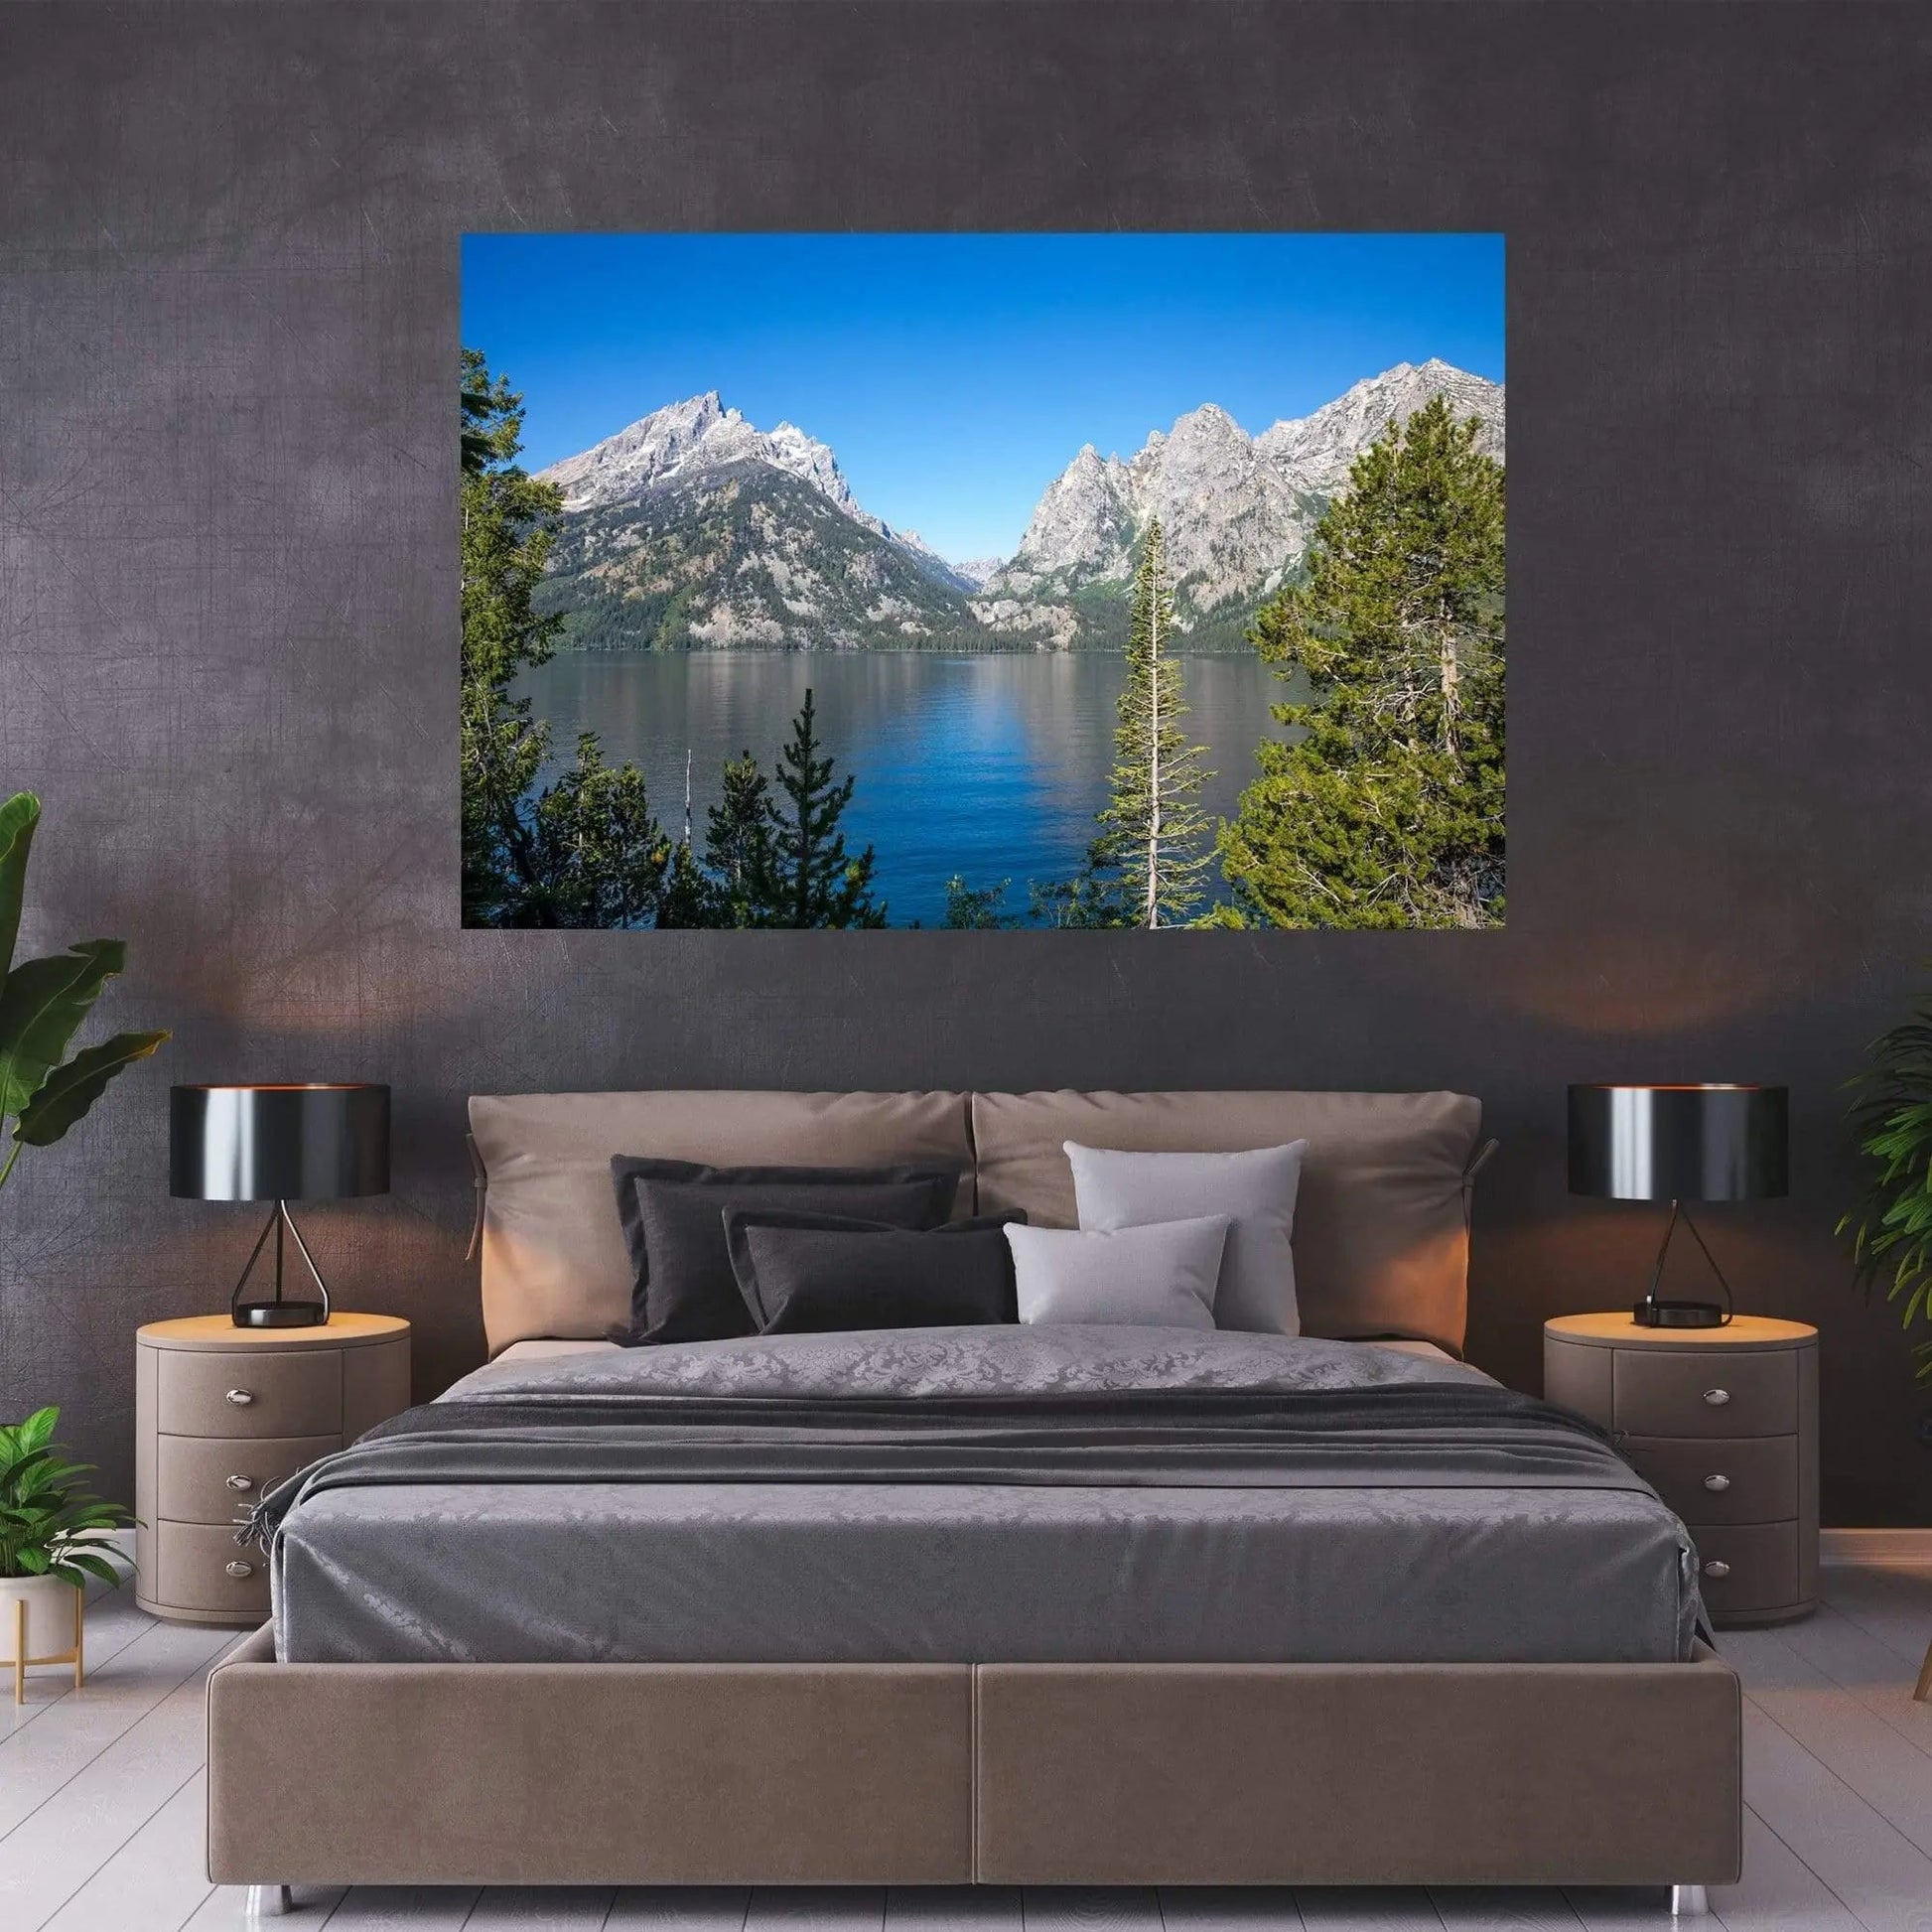 Picture of Jenny Lake and grand Tetons hanging on bedroom wall